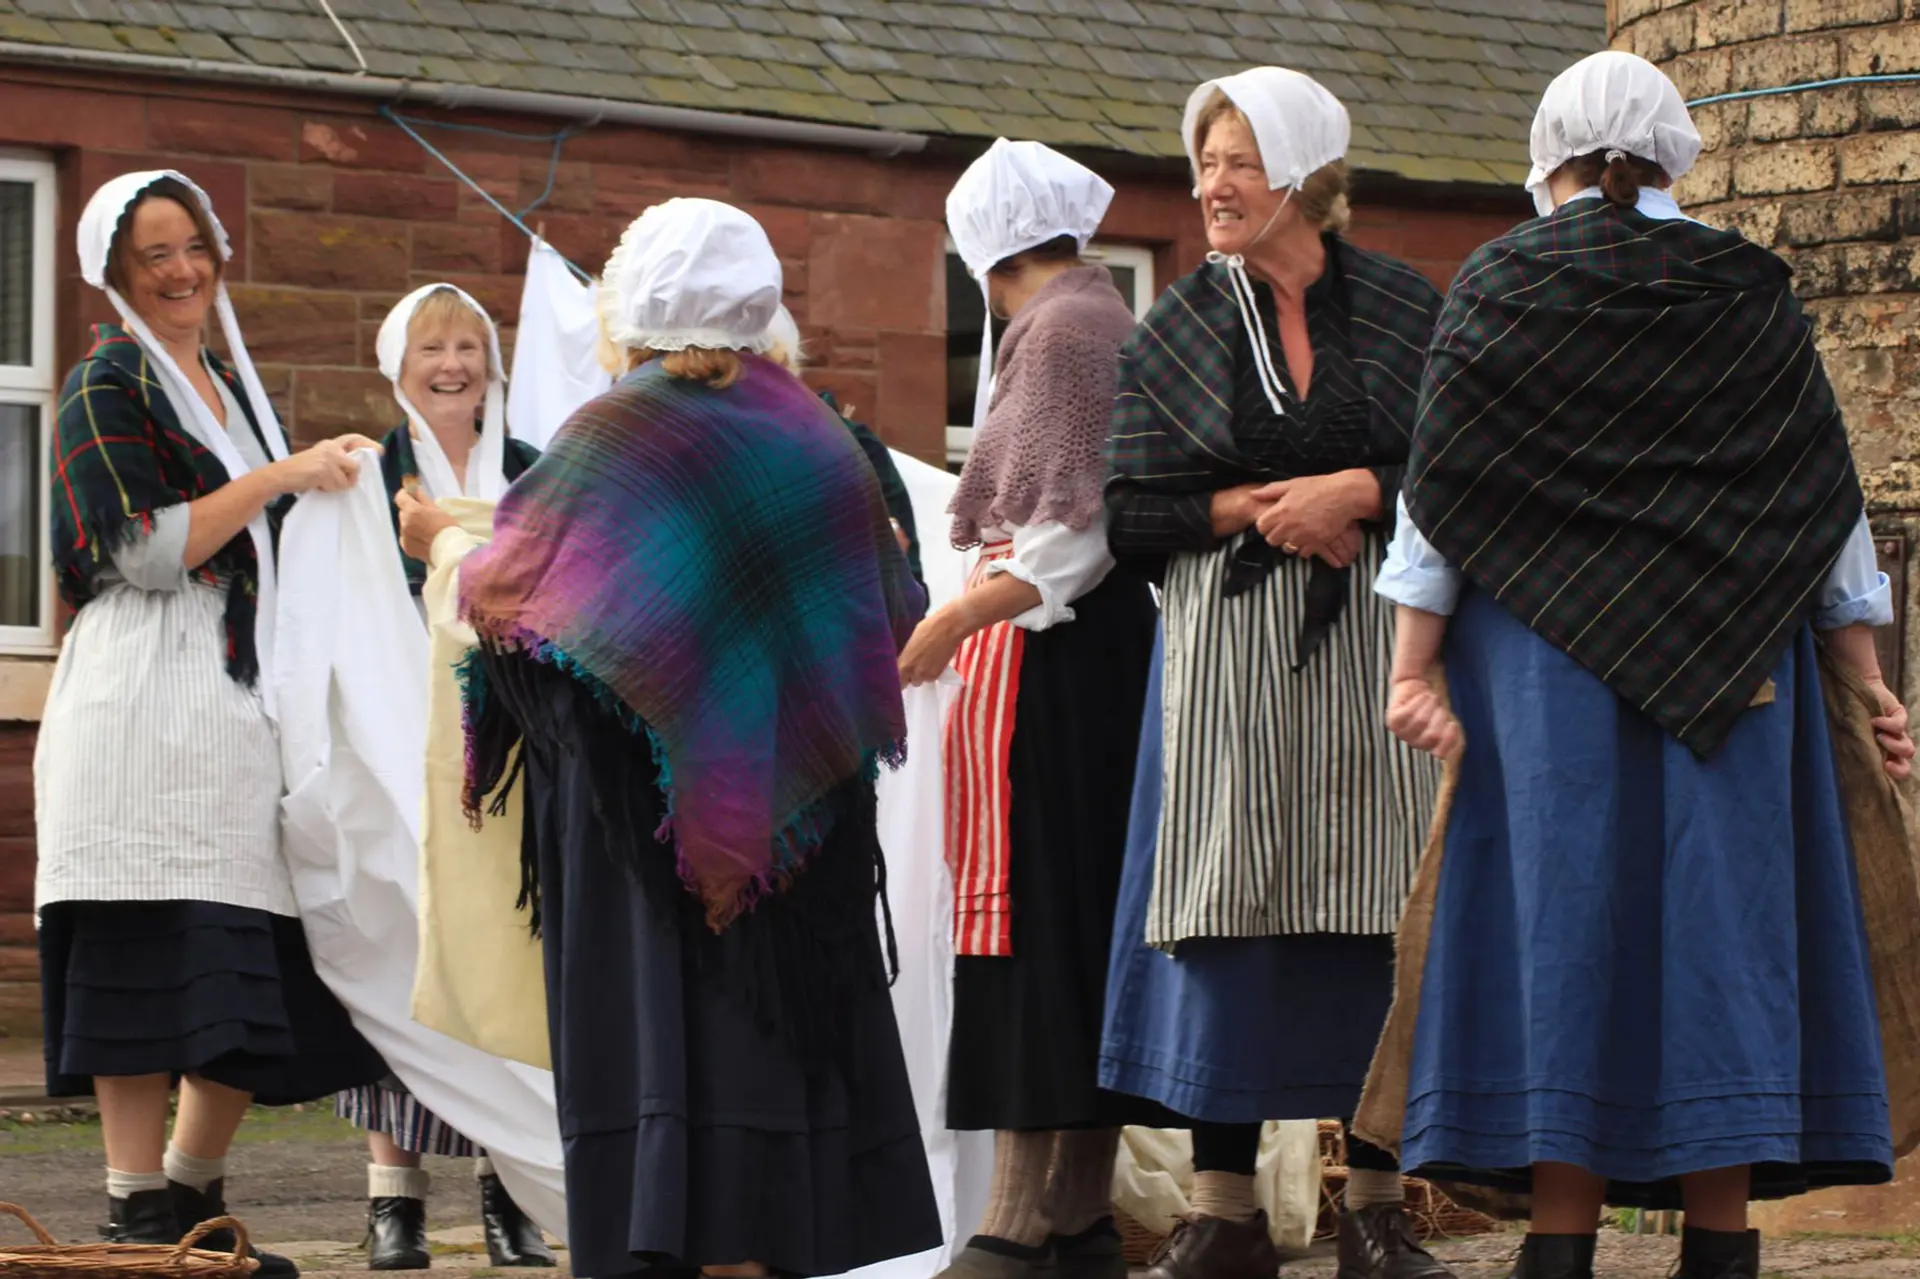 An image of six women dressed up as fishwives, recreating an image from the past. They are laughing and talking. They are wearing long skirts, boots and tartan shawls.